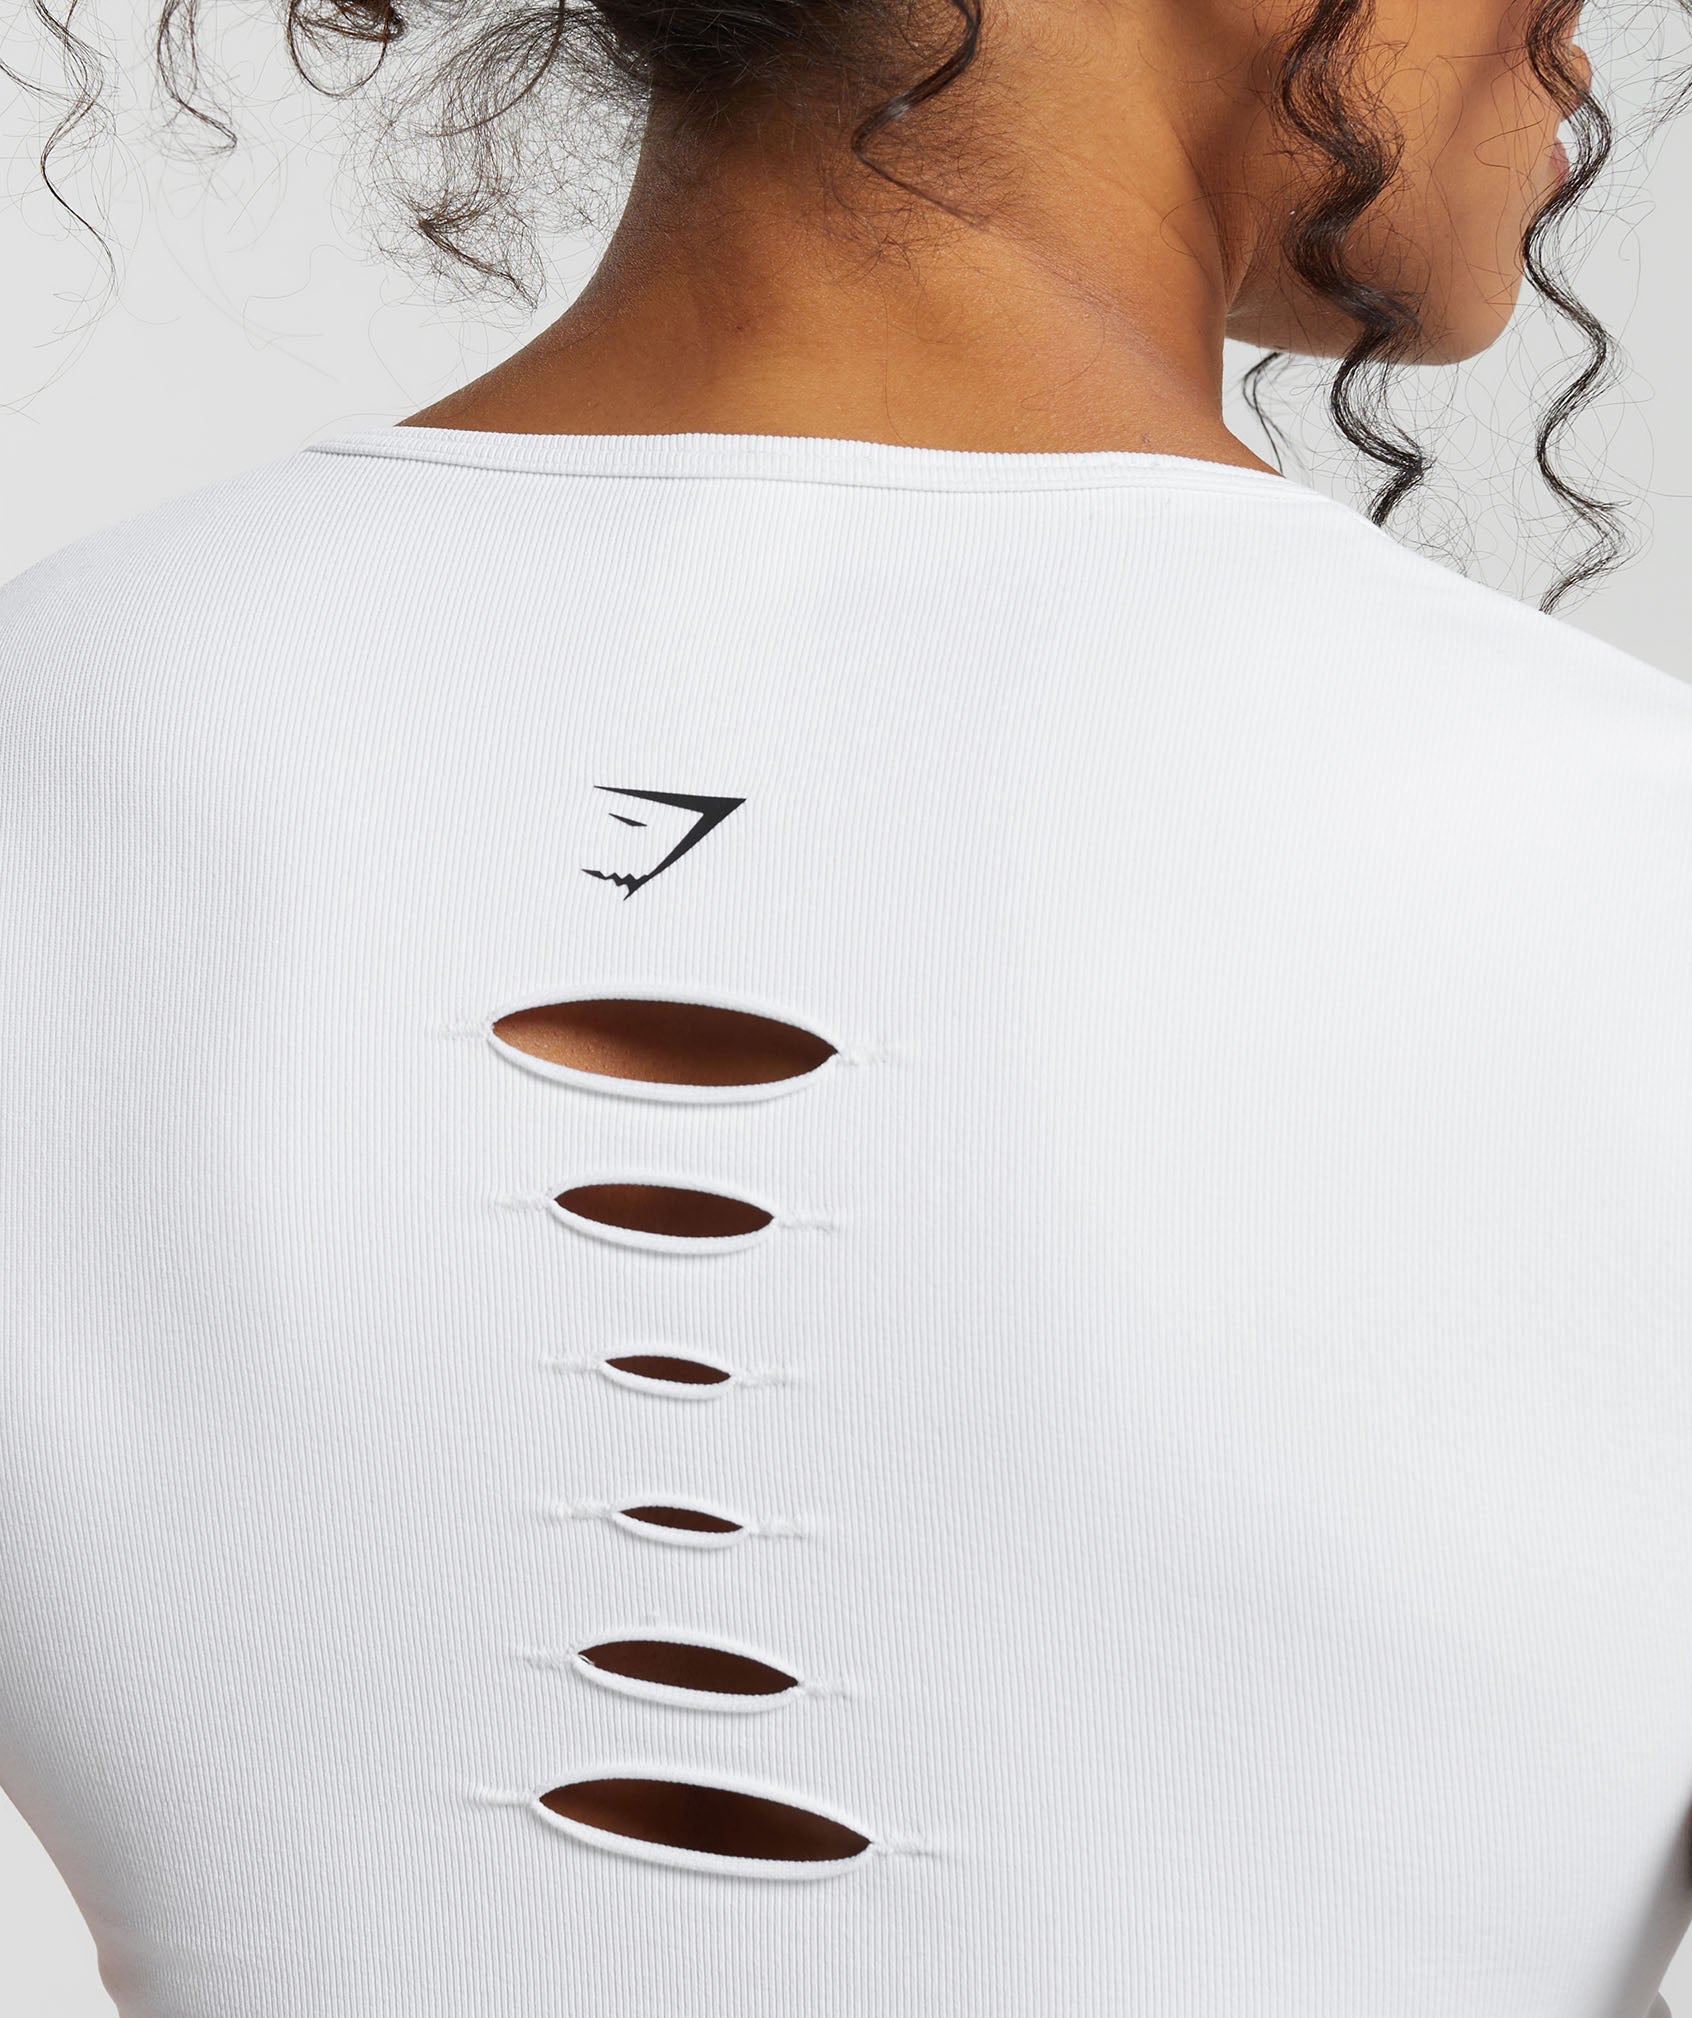 Gains Seamless Fitted Crop Top in White - view 6